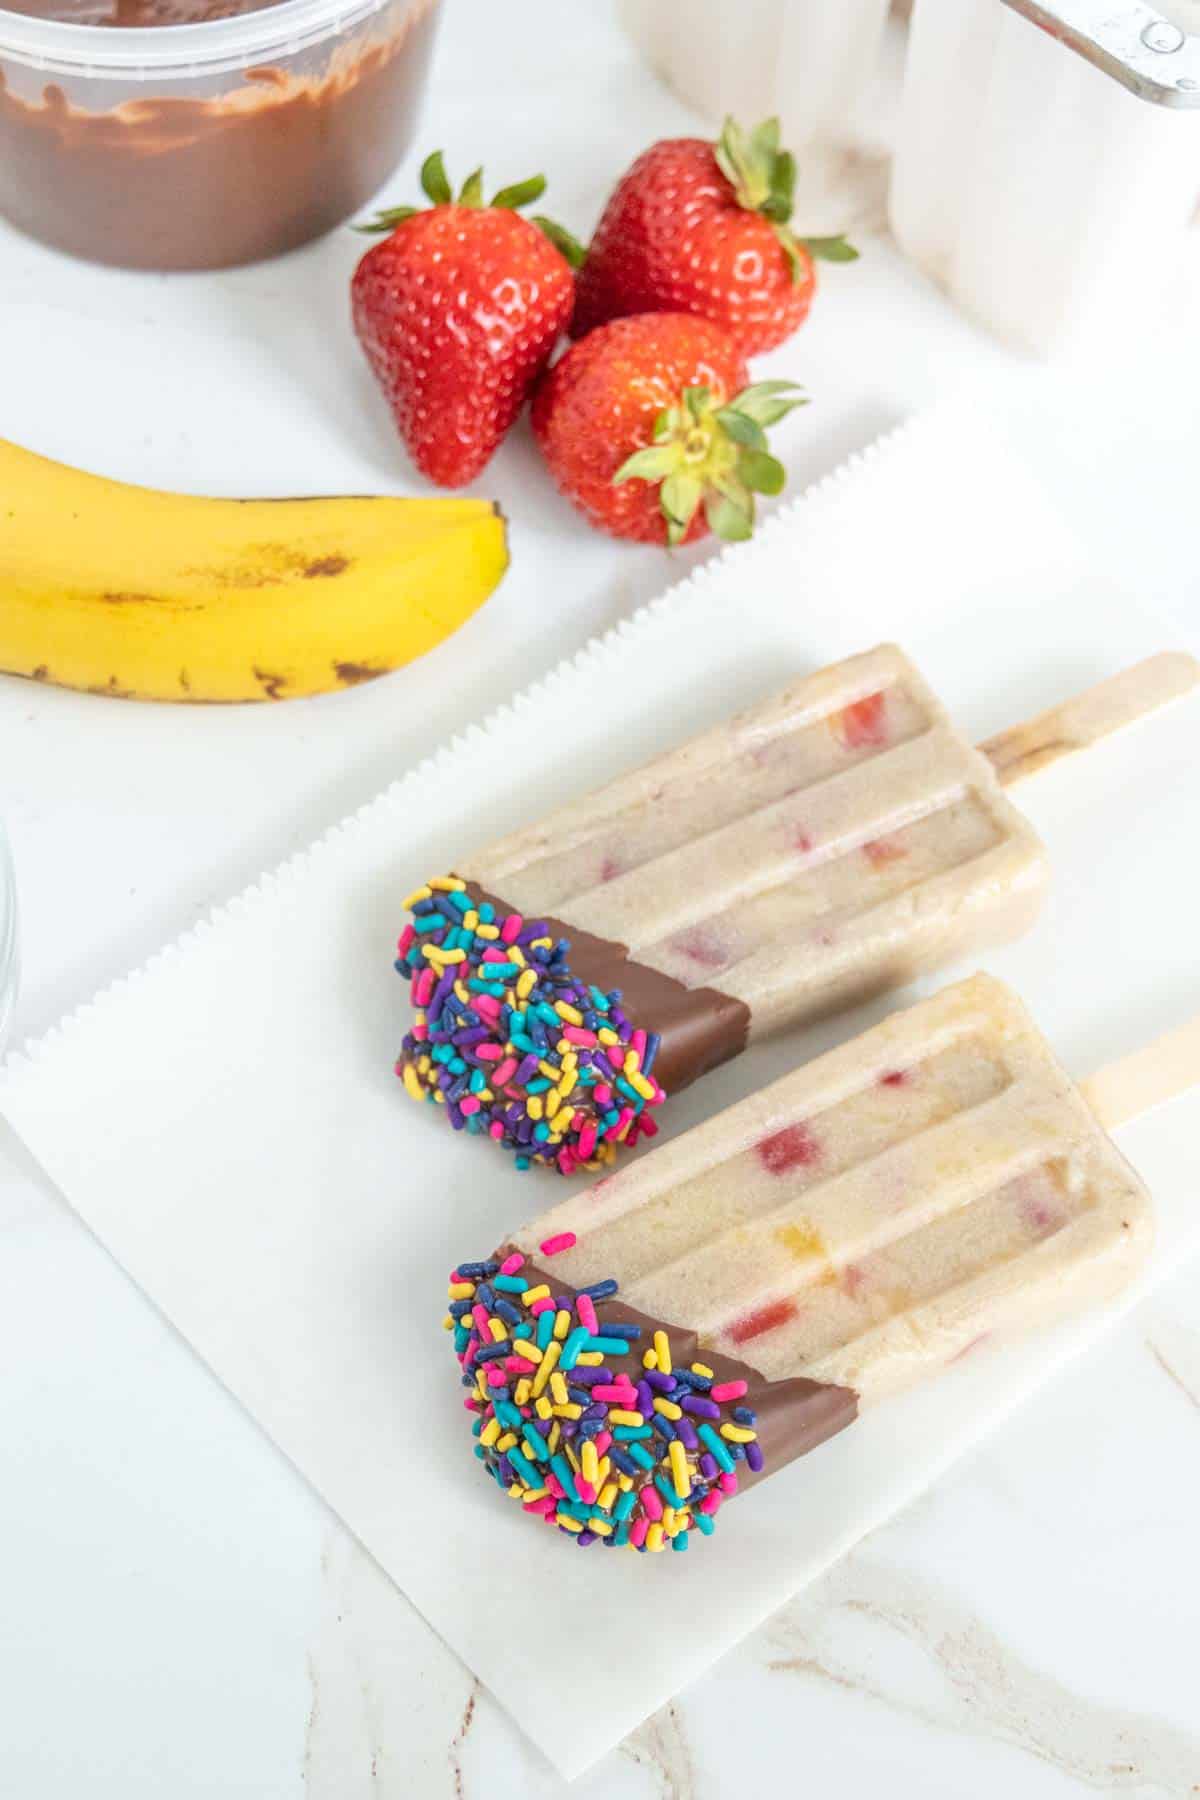 Two popsicles partially dipped in chocolate and colorful sprinkles are placed on a piece of parchment paper beside a banana and fresh strawberries.